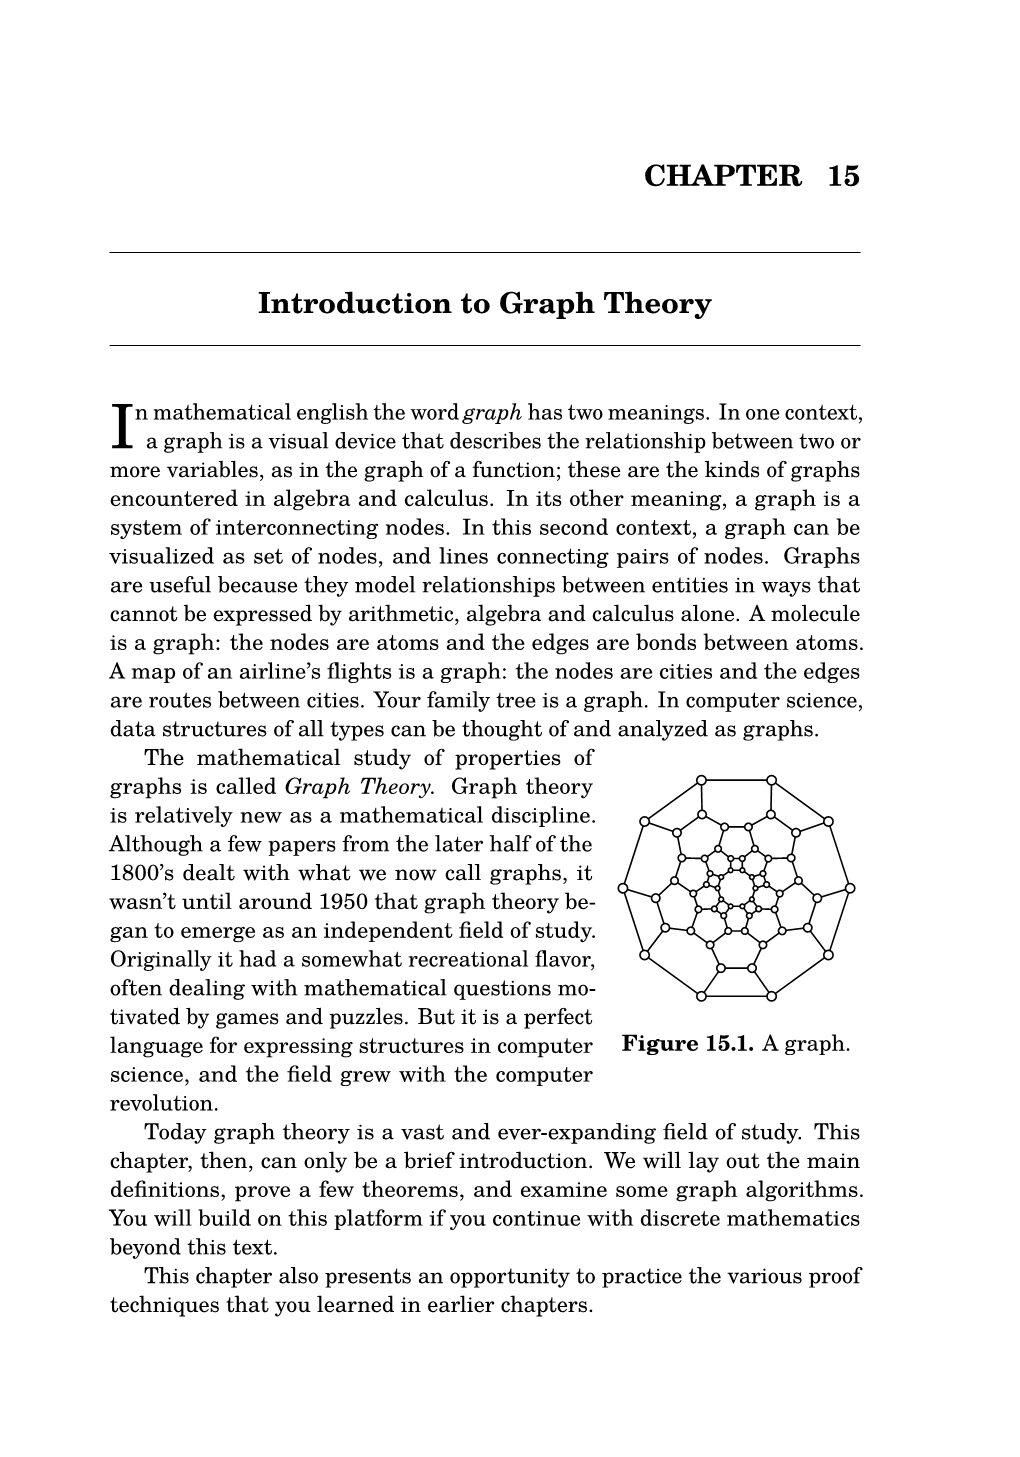 CHAPTER 15 Introduction to Graph Theory